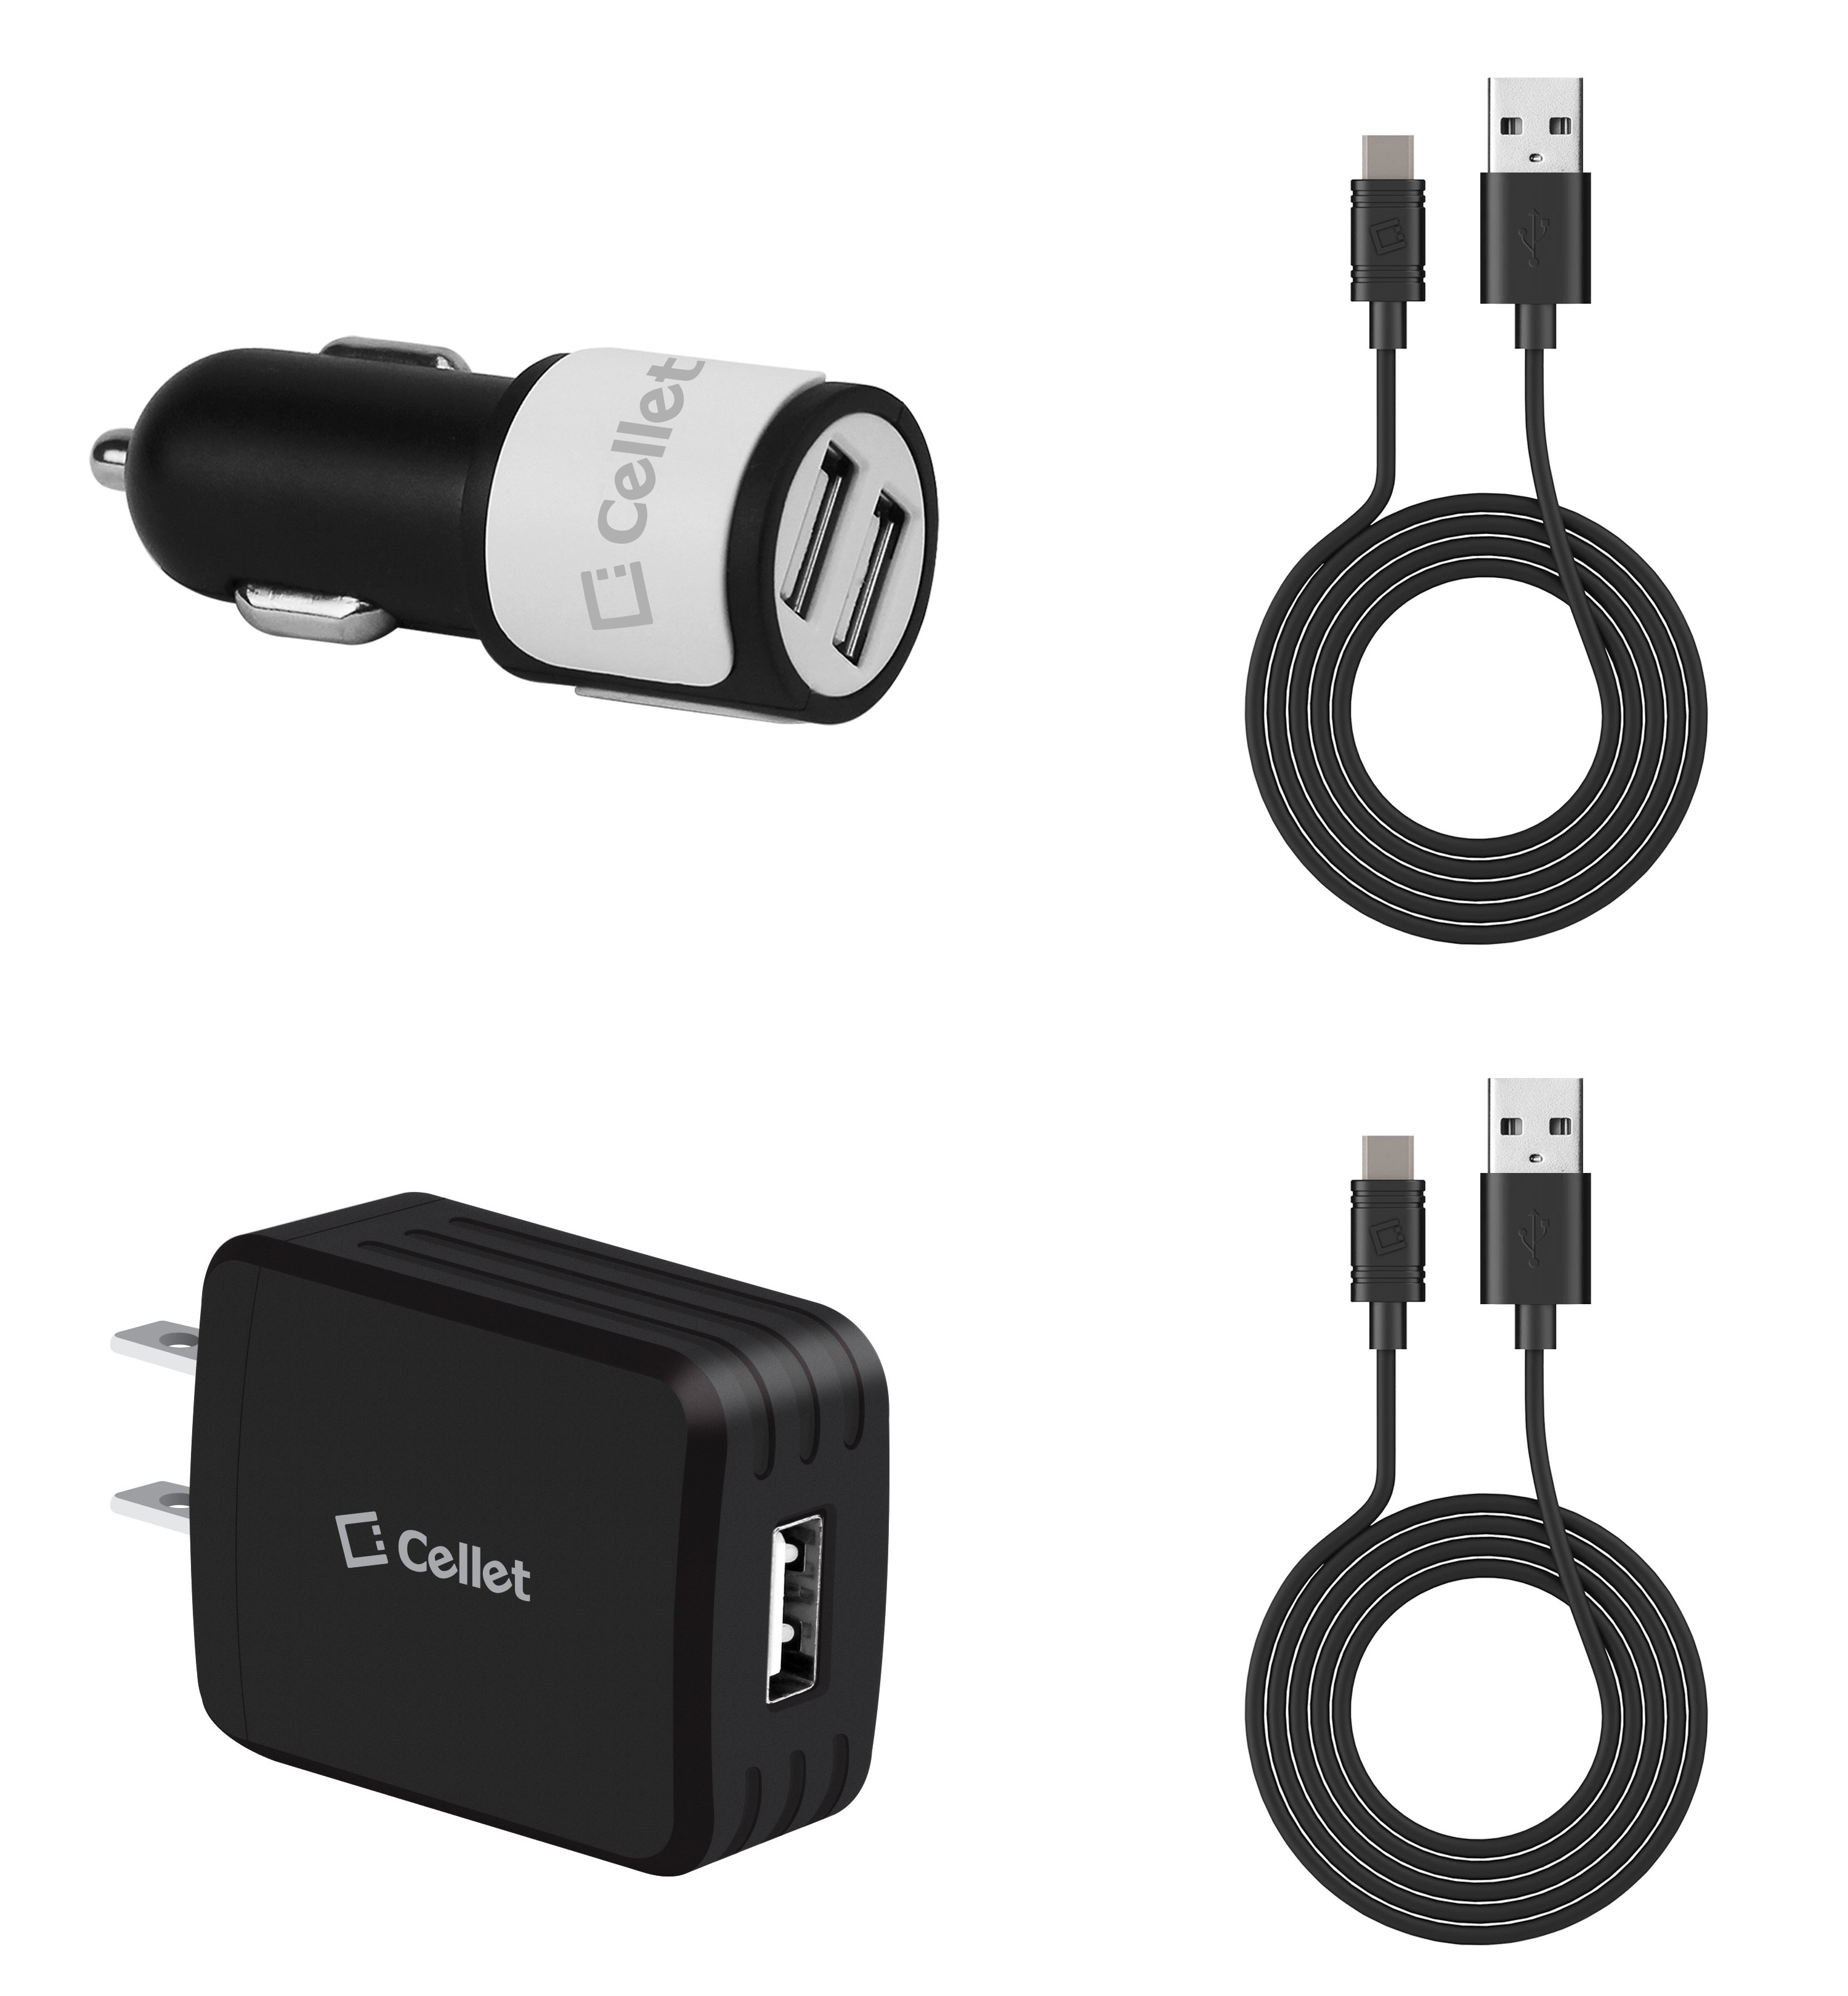 Samsung Galaxy S9 / S9+ Plus Charger Bundle - High Power (10W / 2.1A) Dual Port Car Charger, USB Wall Charger with Detachable USB Type-C (USB-C) to USB (USB-A) Cables [4 feet] and Atom Cloth - image 1 of 9